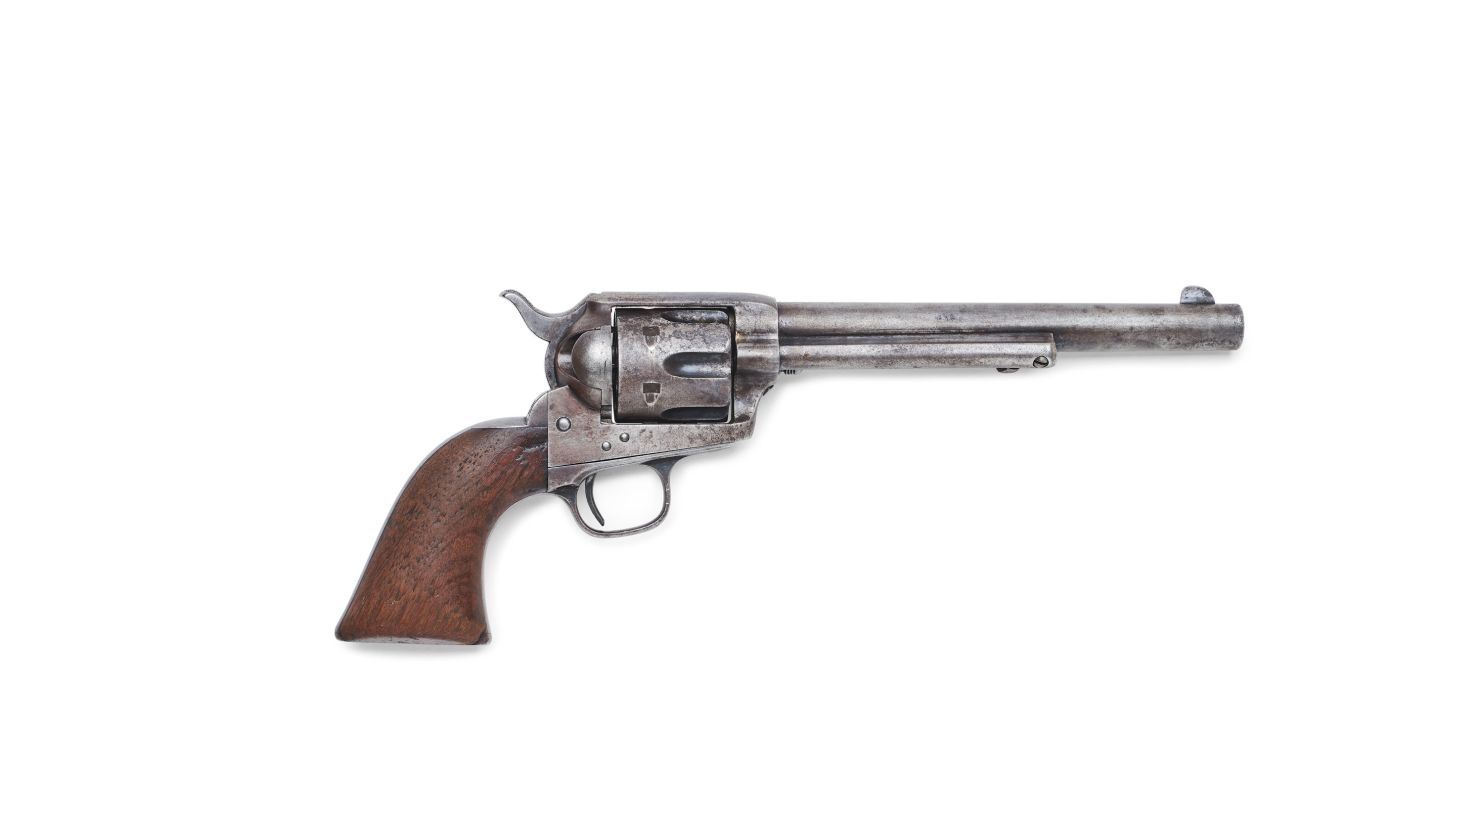 The Colt Single Action firearm, used by Sheriff Pat Garrett to kill Billy the Kid 140 years ago, is expected to reach $2-3 million at auction.